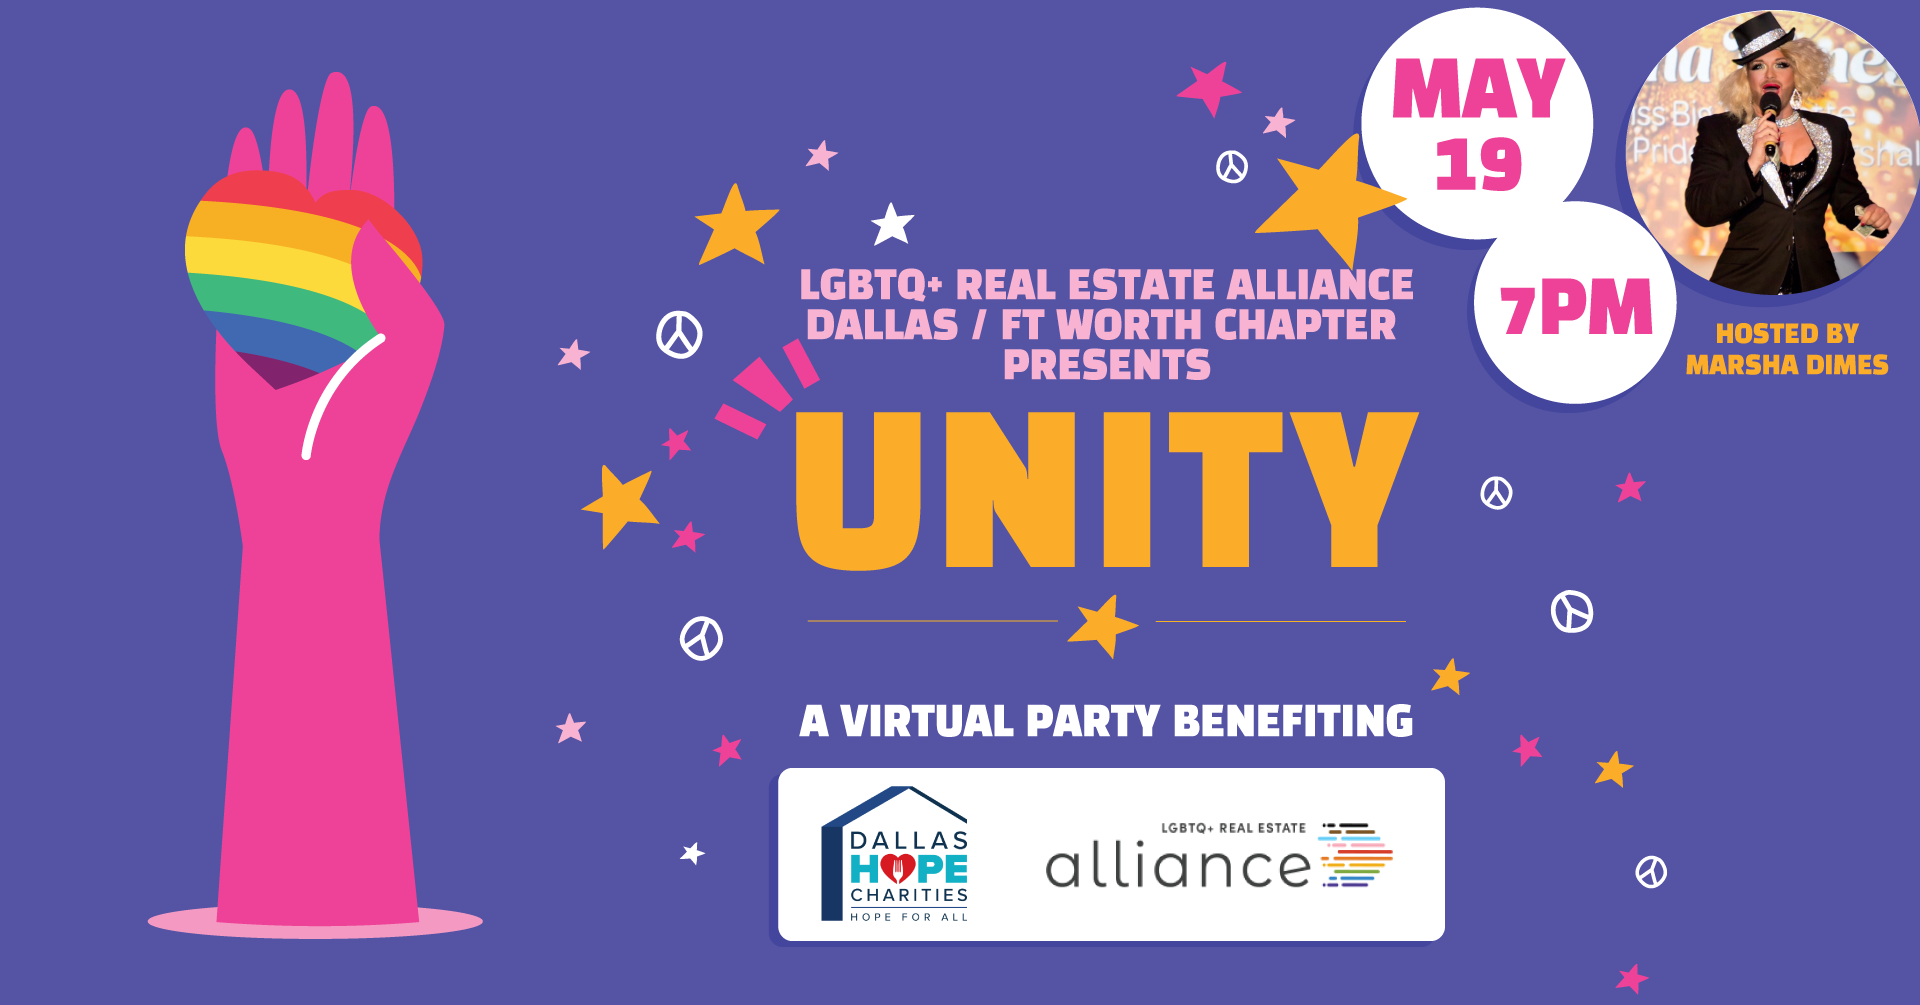 UNITY - A Virtual Party benefiting the LGBTQ+ Real Estate Alliance Dallas / Ft Worth Chapter and Dallas Hope Charities